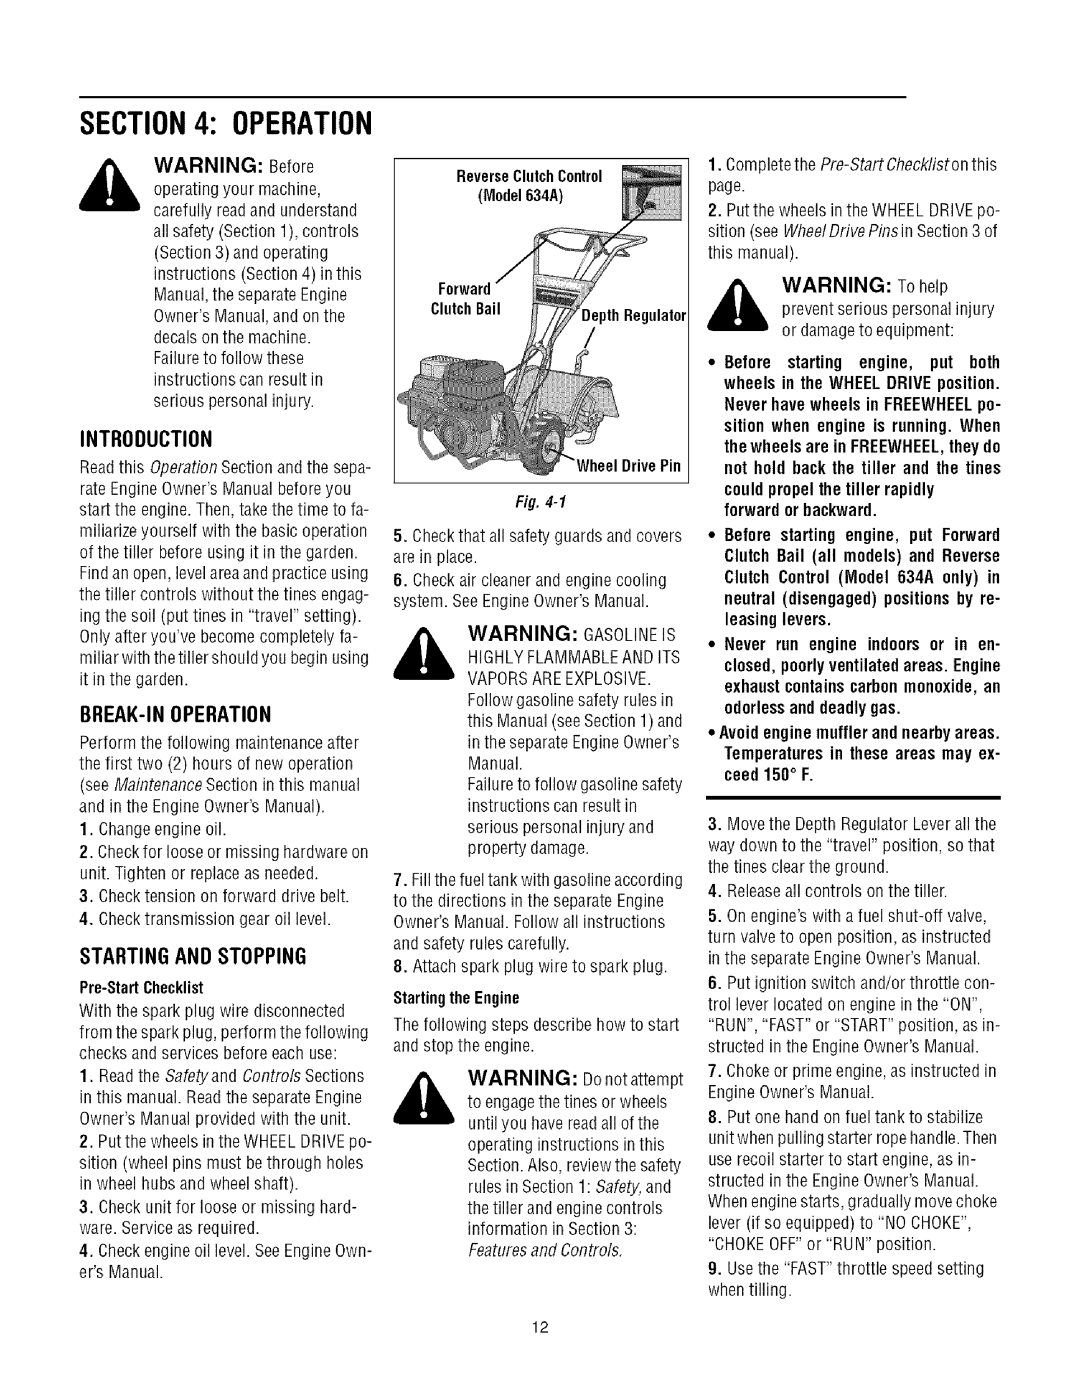 Troy-Bilt 634K, 634A Operation, Break-Inoperation, Starting And Stopping, WARNING Donot attempt, WARNING To help, Arning 